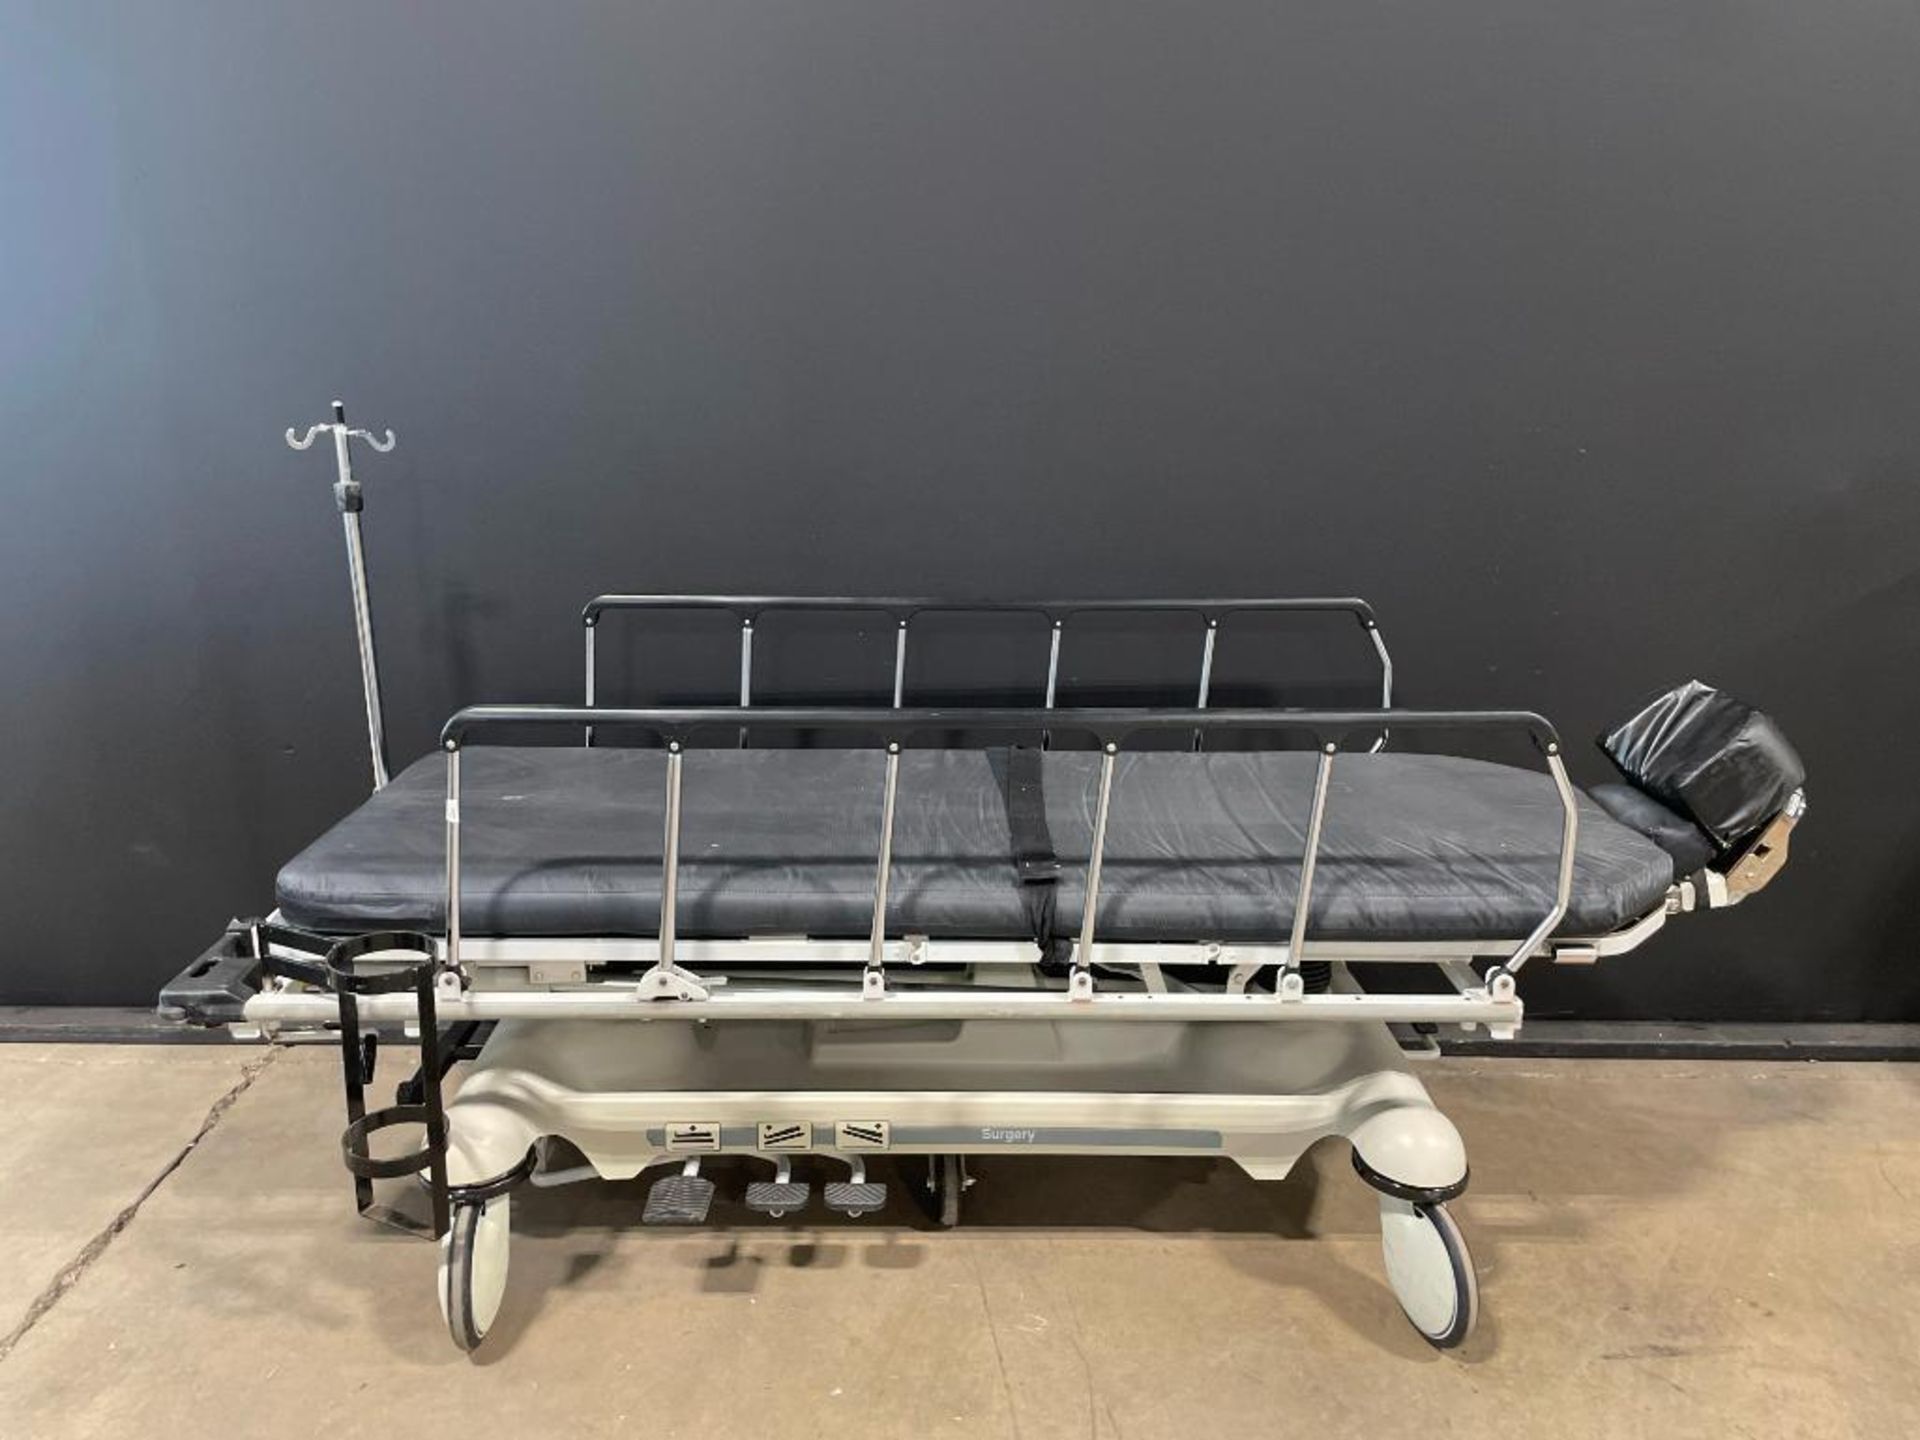 STRYKER 1068 HEAD & NECK STRETCHER WITH ARTICULATING HEADREST - Image 2 of 4